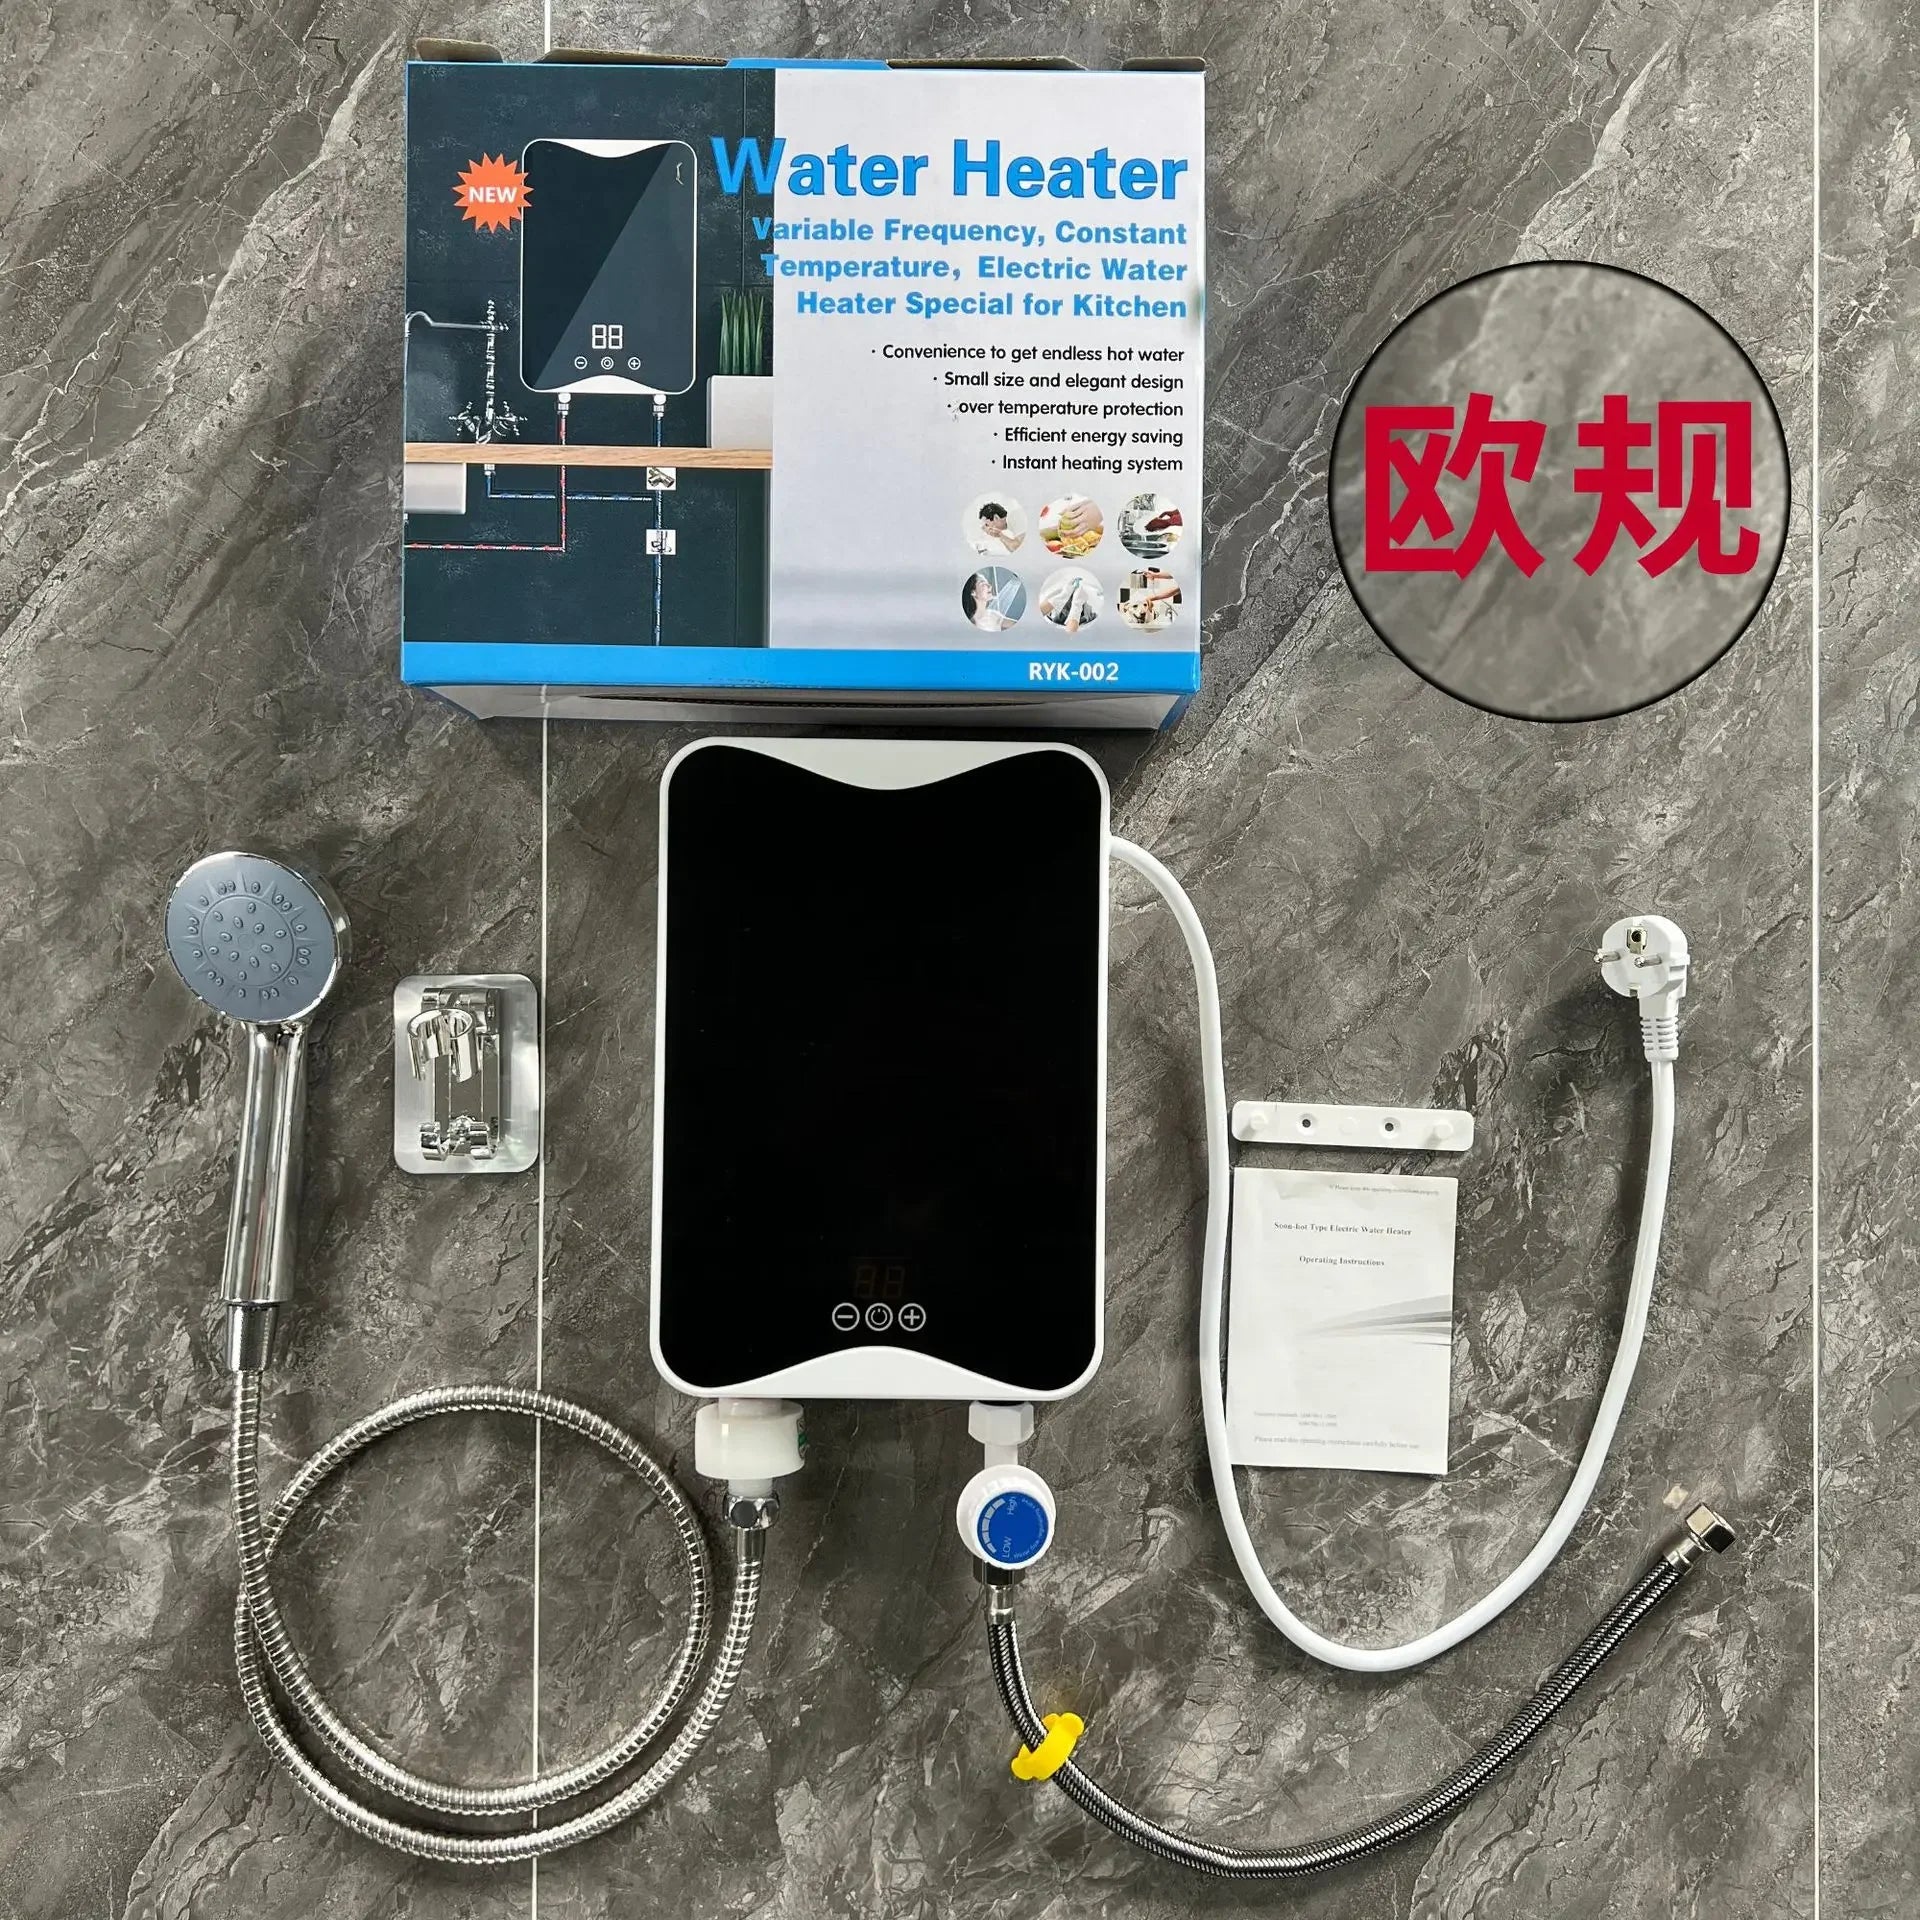 Electric Tankless Water Heater, Mini Instant Hot Water Heater with LCD Display for Shower Bathroom Kitchen Washing